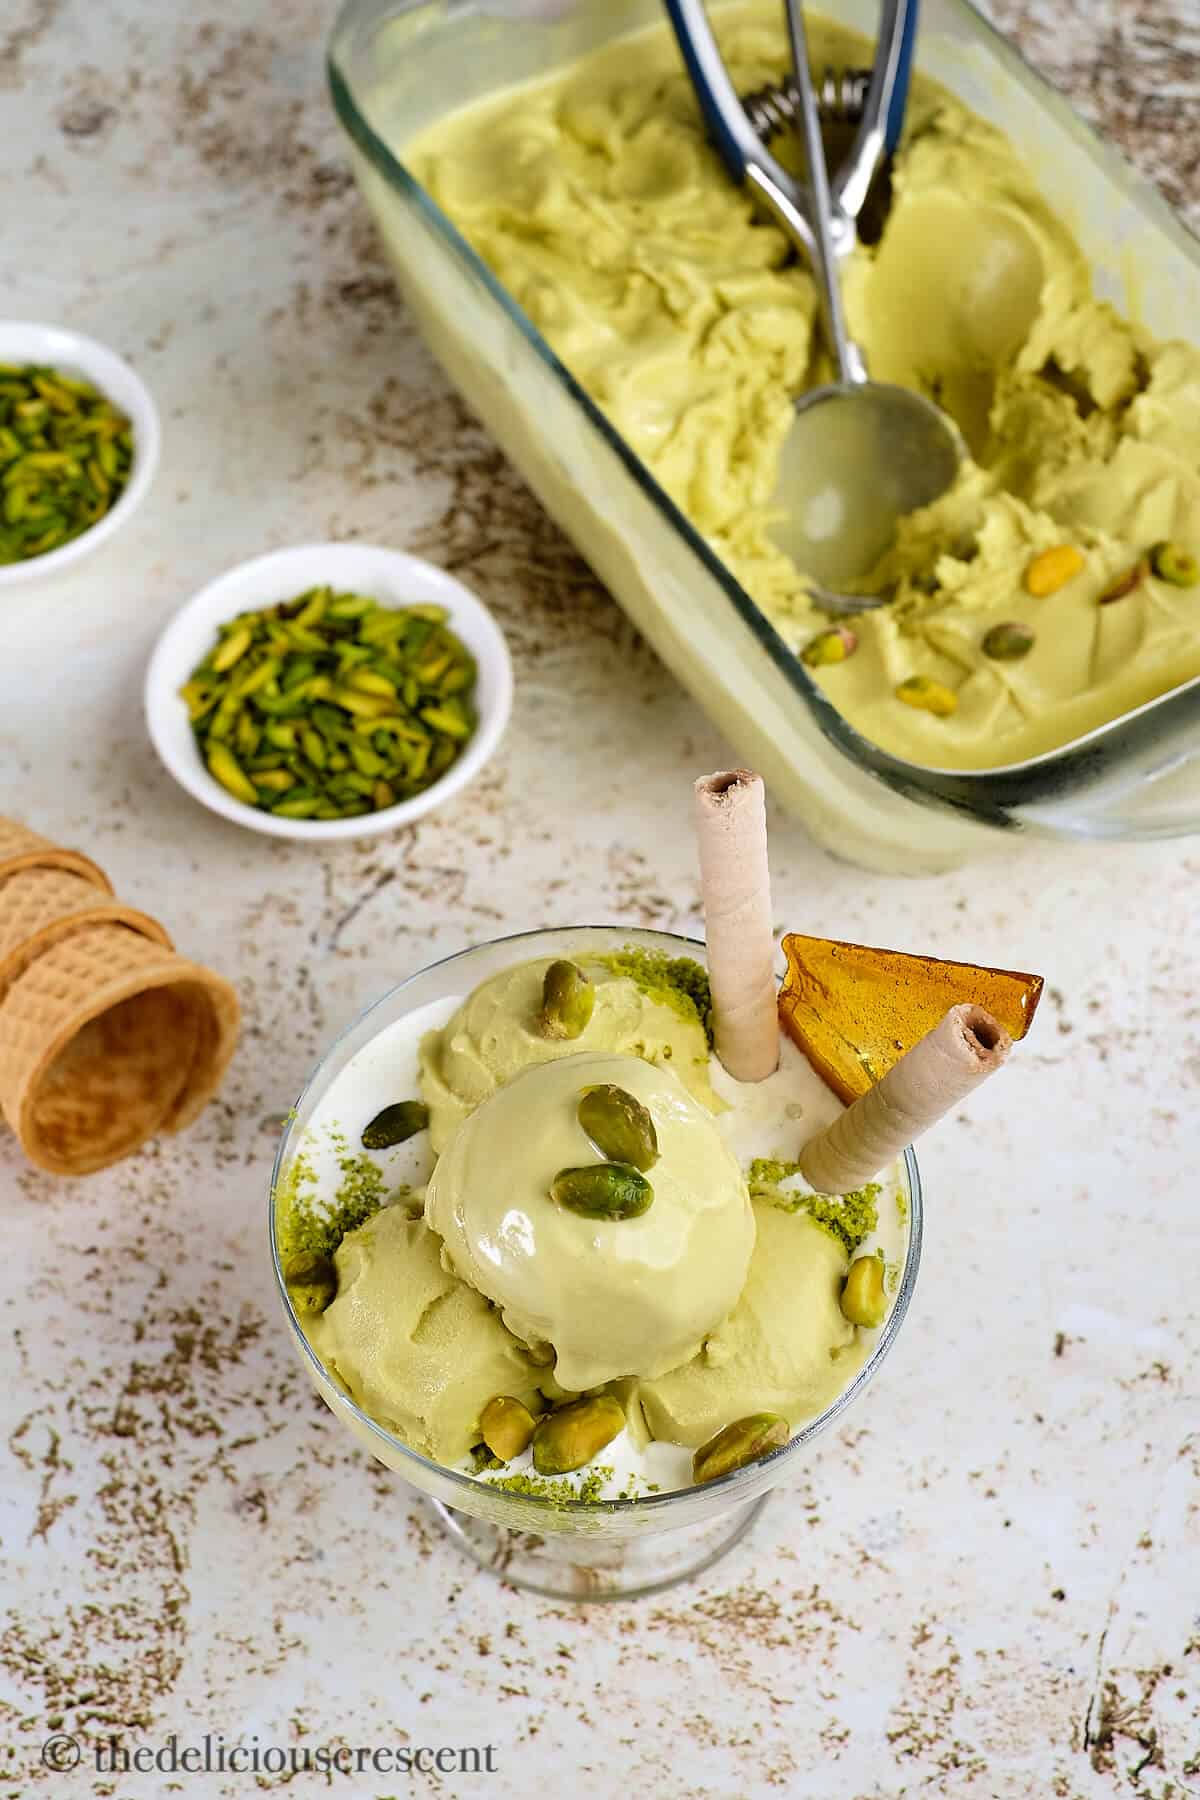 Nutty ice cream in a serving bowl and in a glass dish.